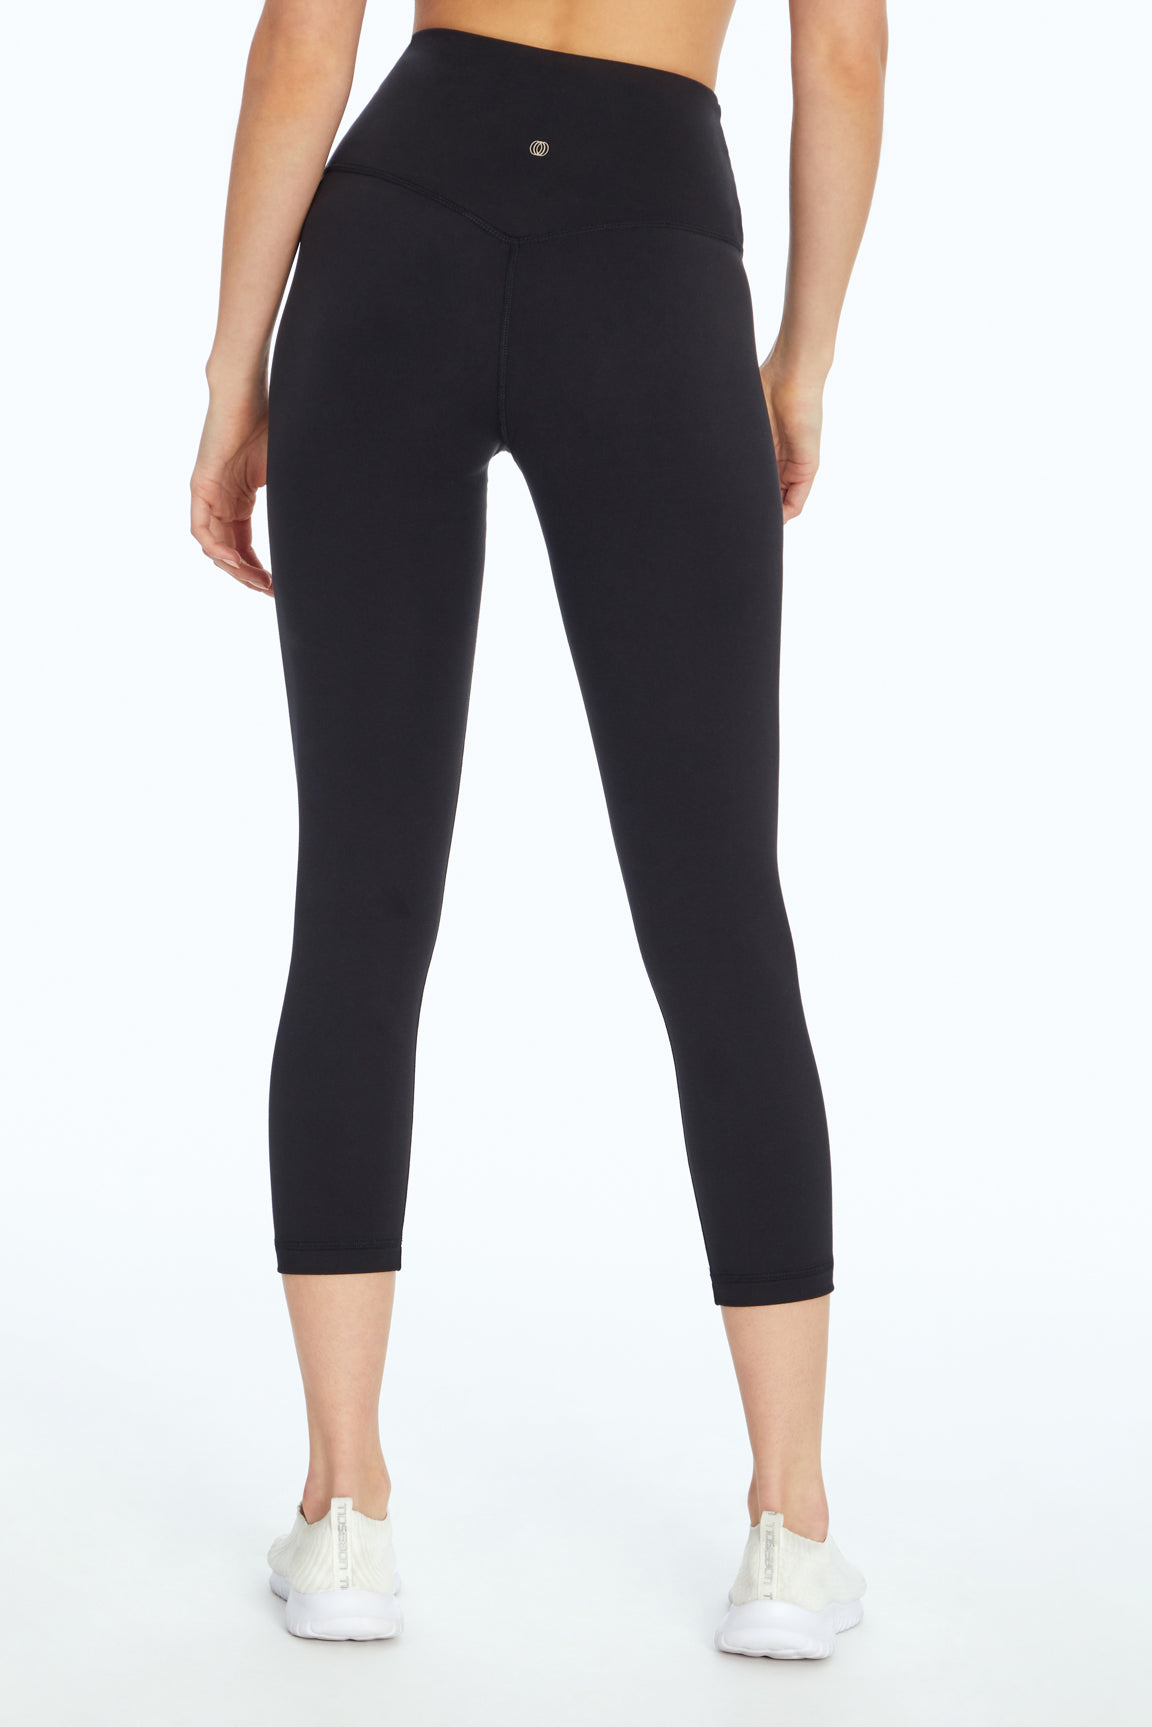 Capris & Cropped Leggings for Women – Tagged high-waist